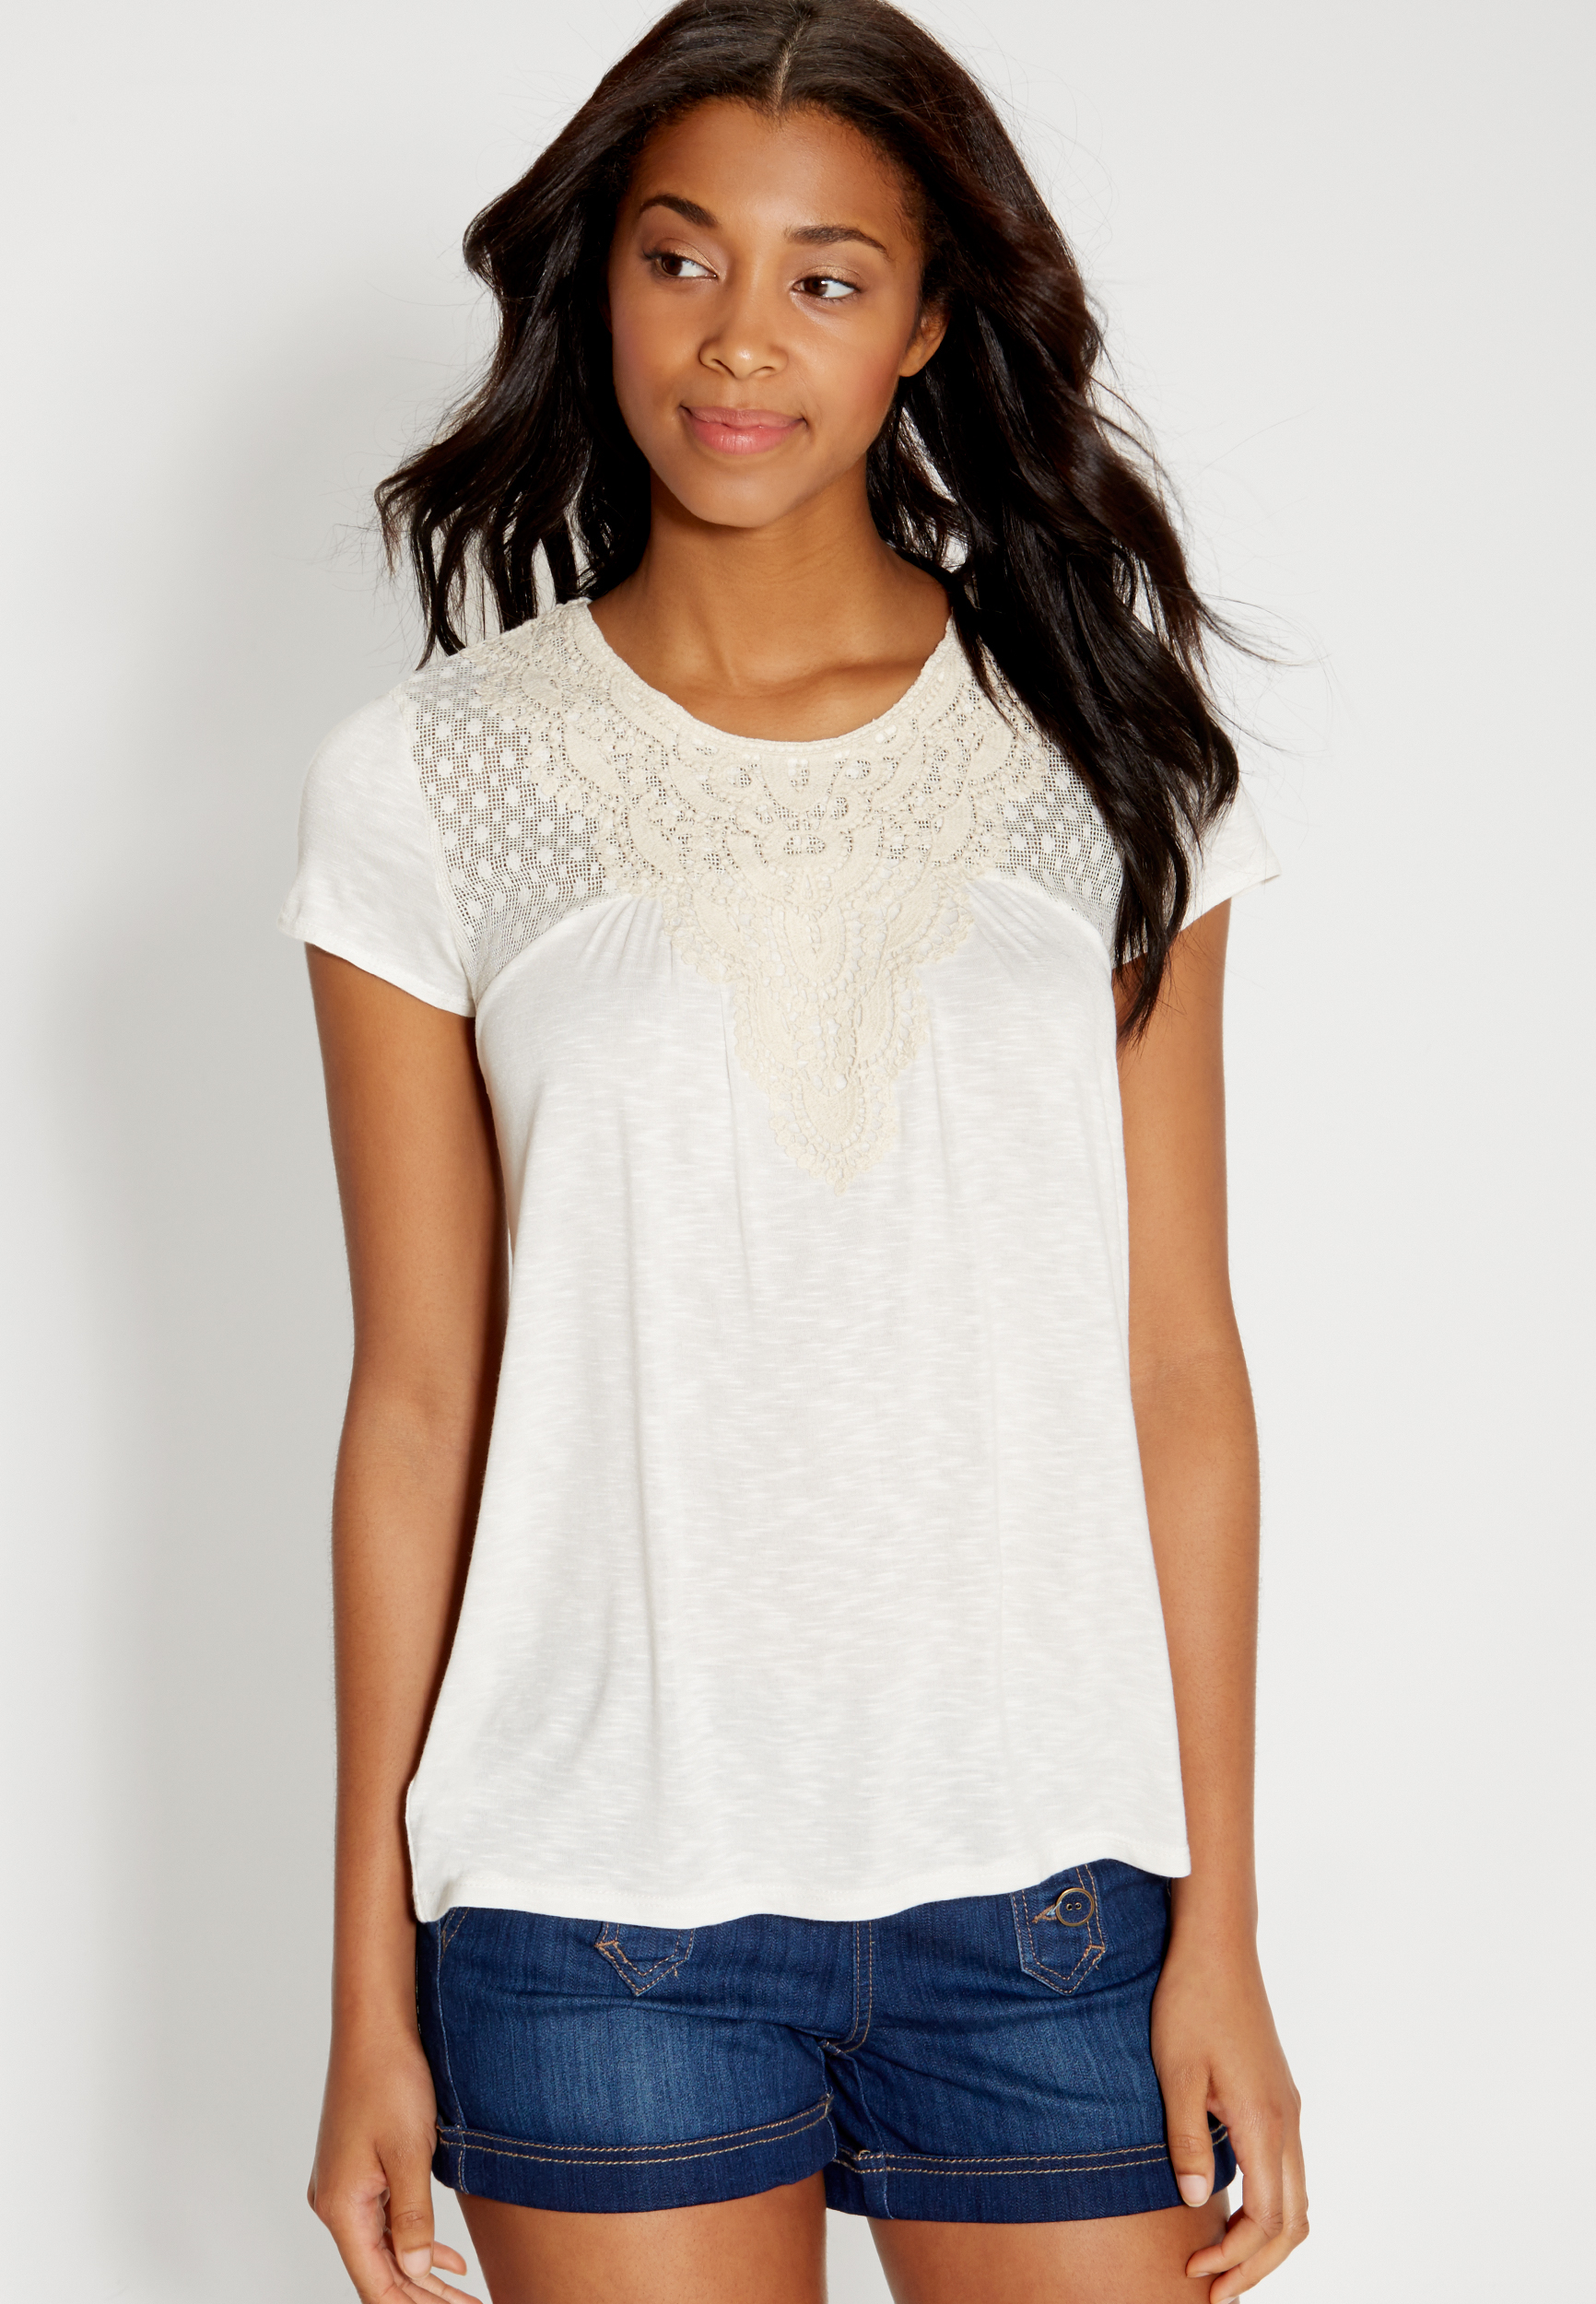 tee with crochet and dot lace yoke | maurices